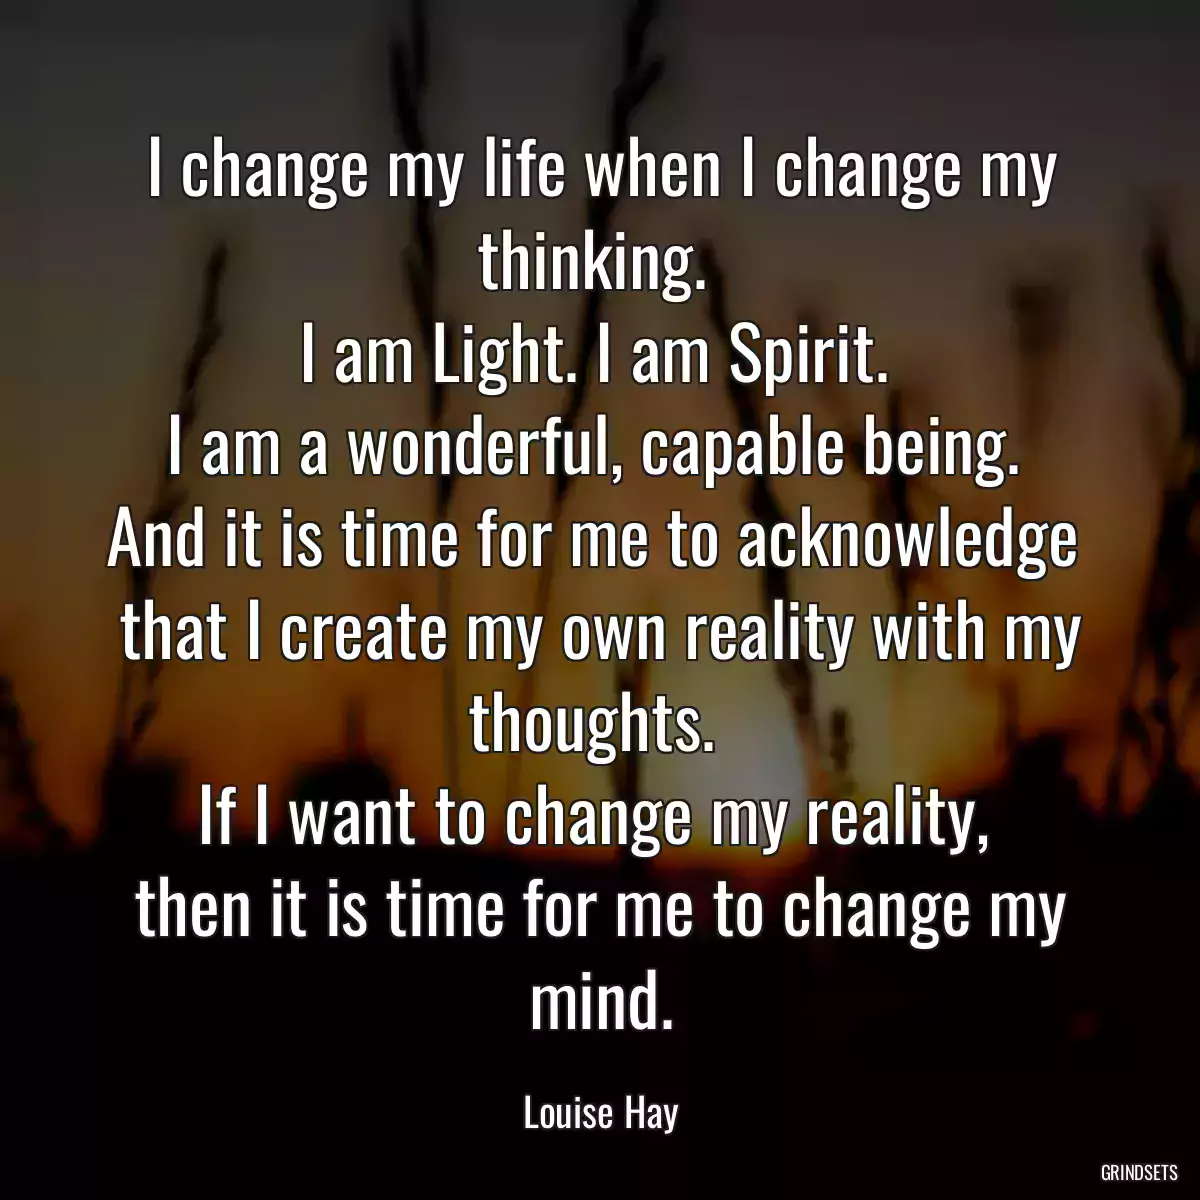 I change my life when I change my thinking. 
I am Light. I am Spirit. 
I am a wonderful, capable being. 
And it is time for me to acknowledge 
that I create my own reality with my thoughts. 
If I want to change my reality, 
then it is time for me to change my mind.